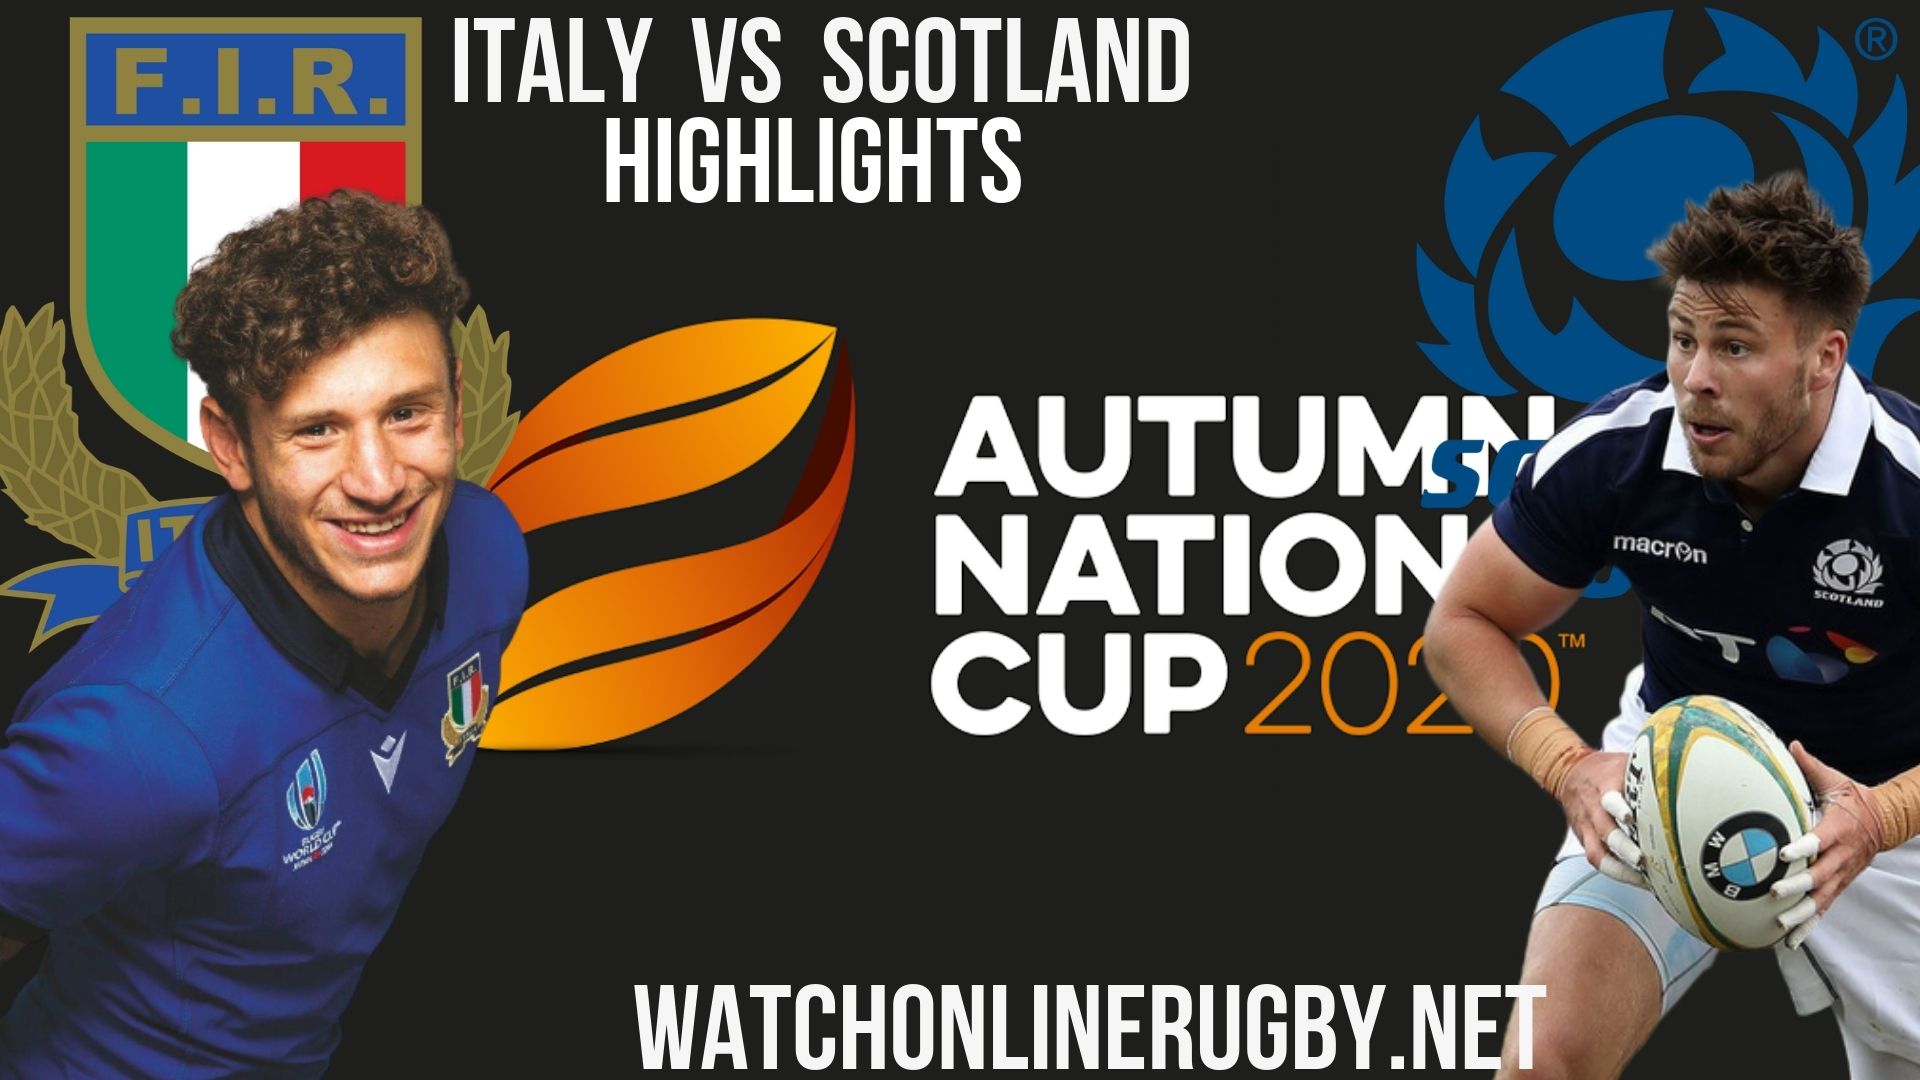 Italy Vs Scotland Autumn Nations Cup 2020